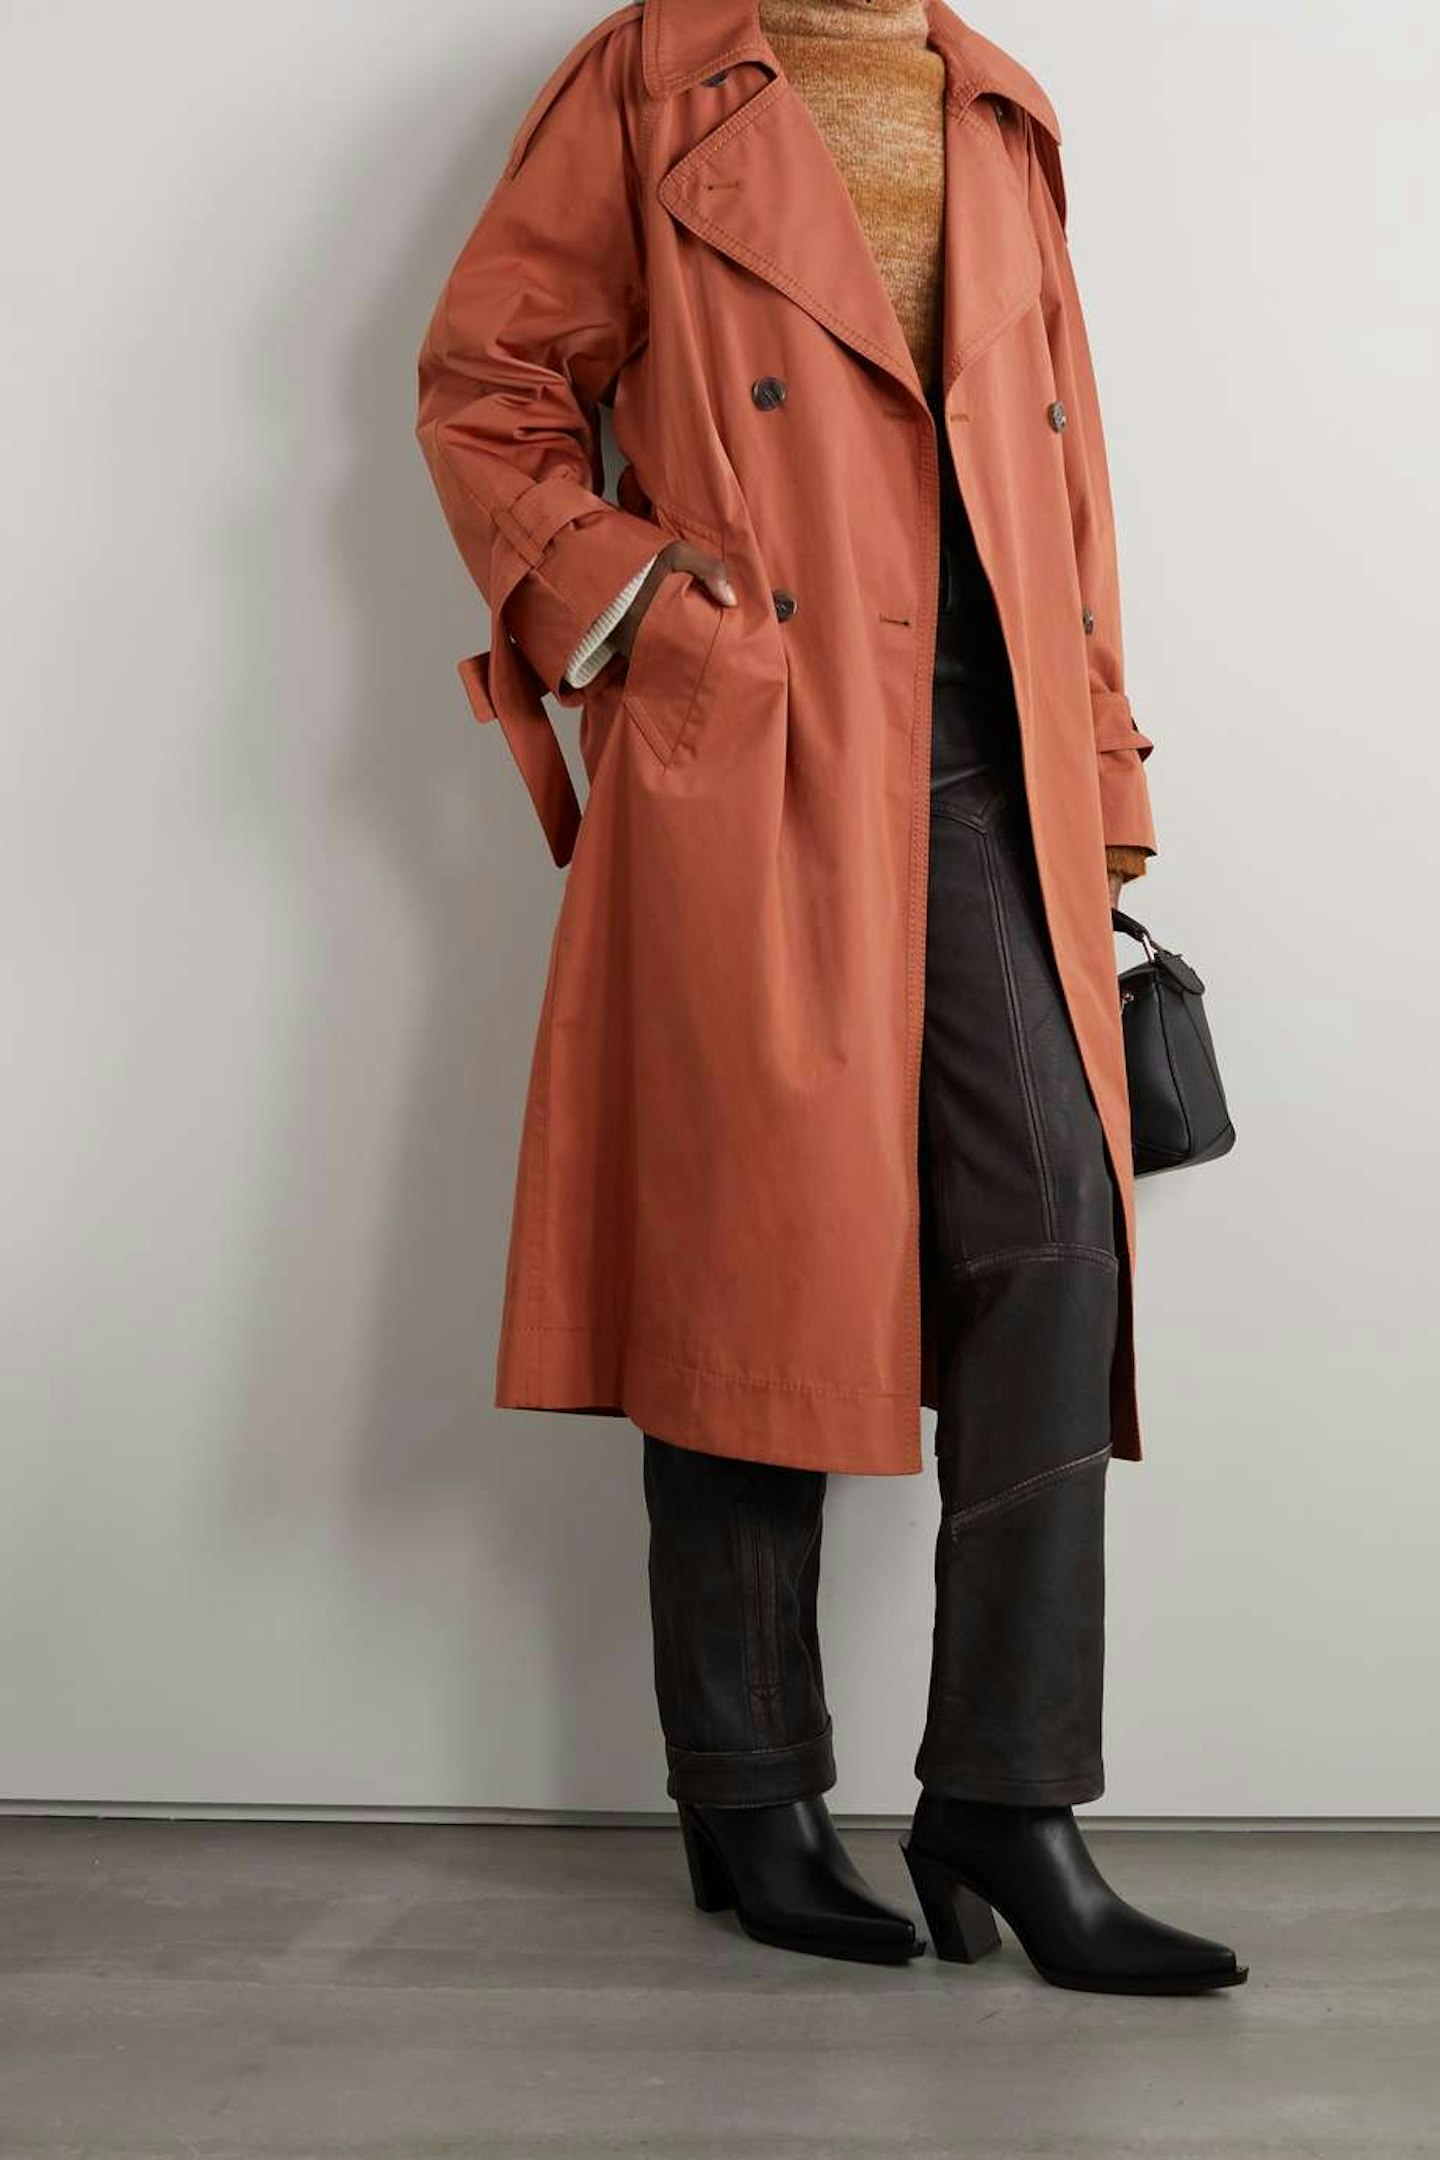 best trench coats for women Acne Studios, Double Breasted Belted Cotton Trench Coat, £650